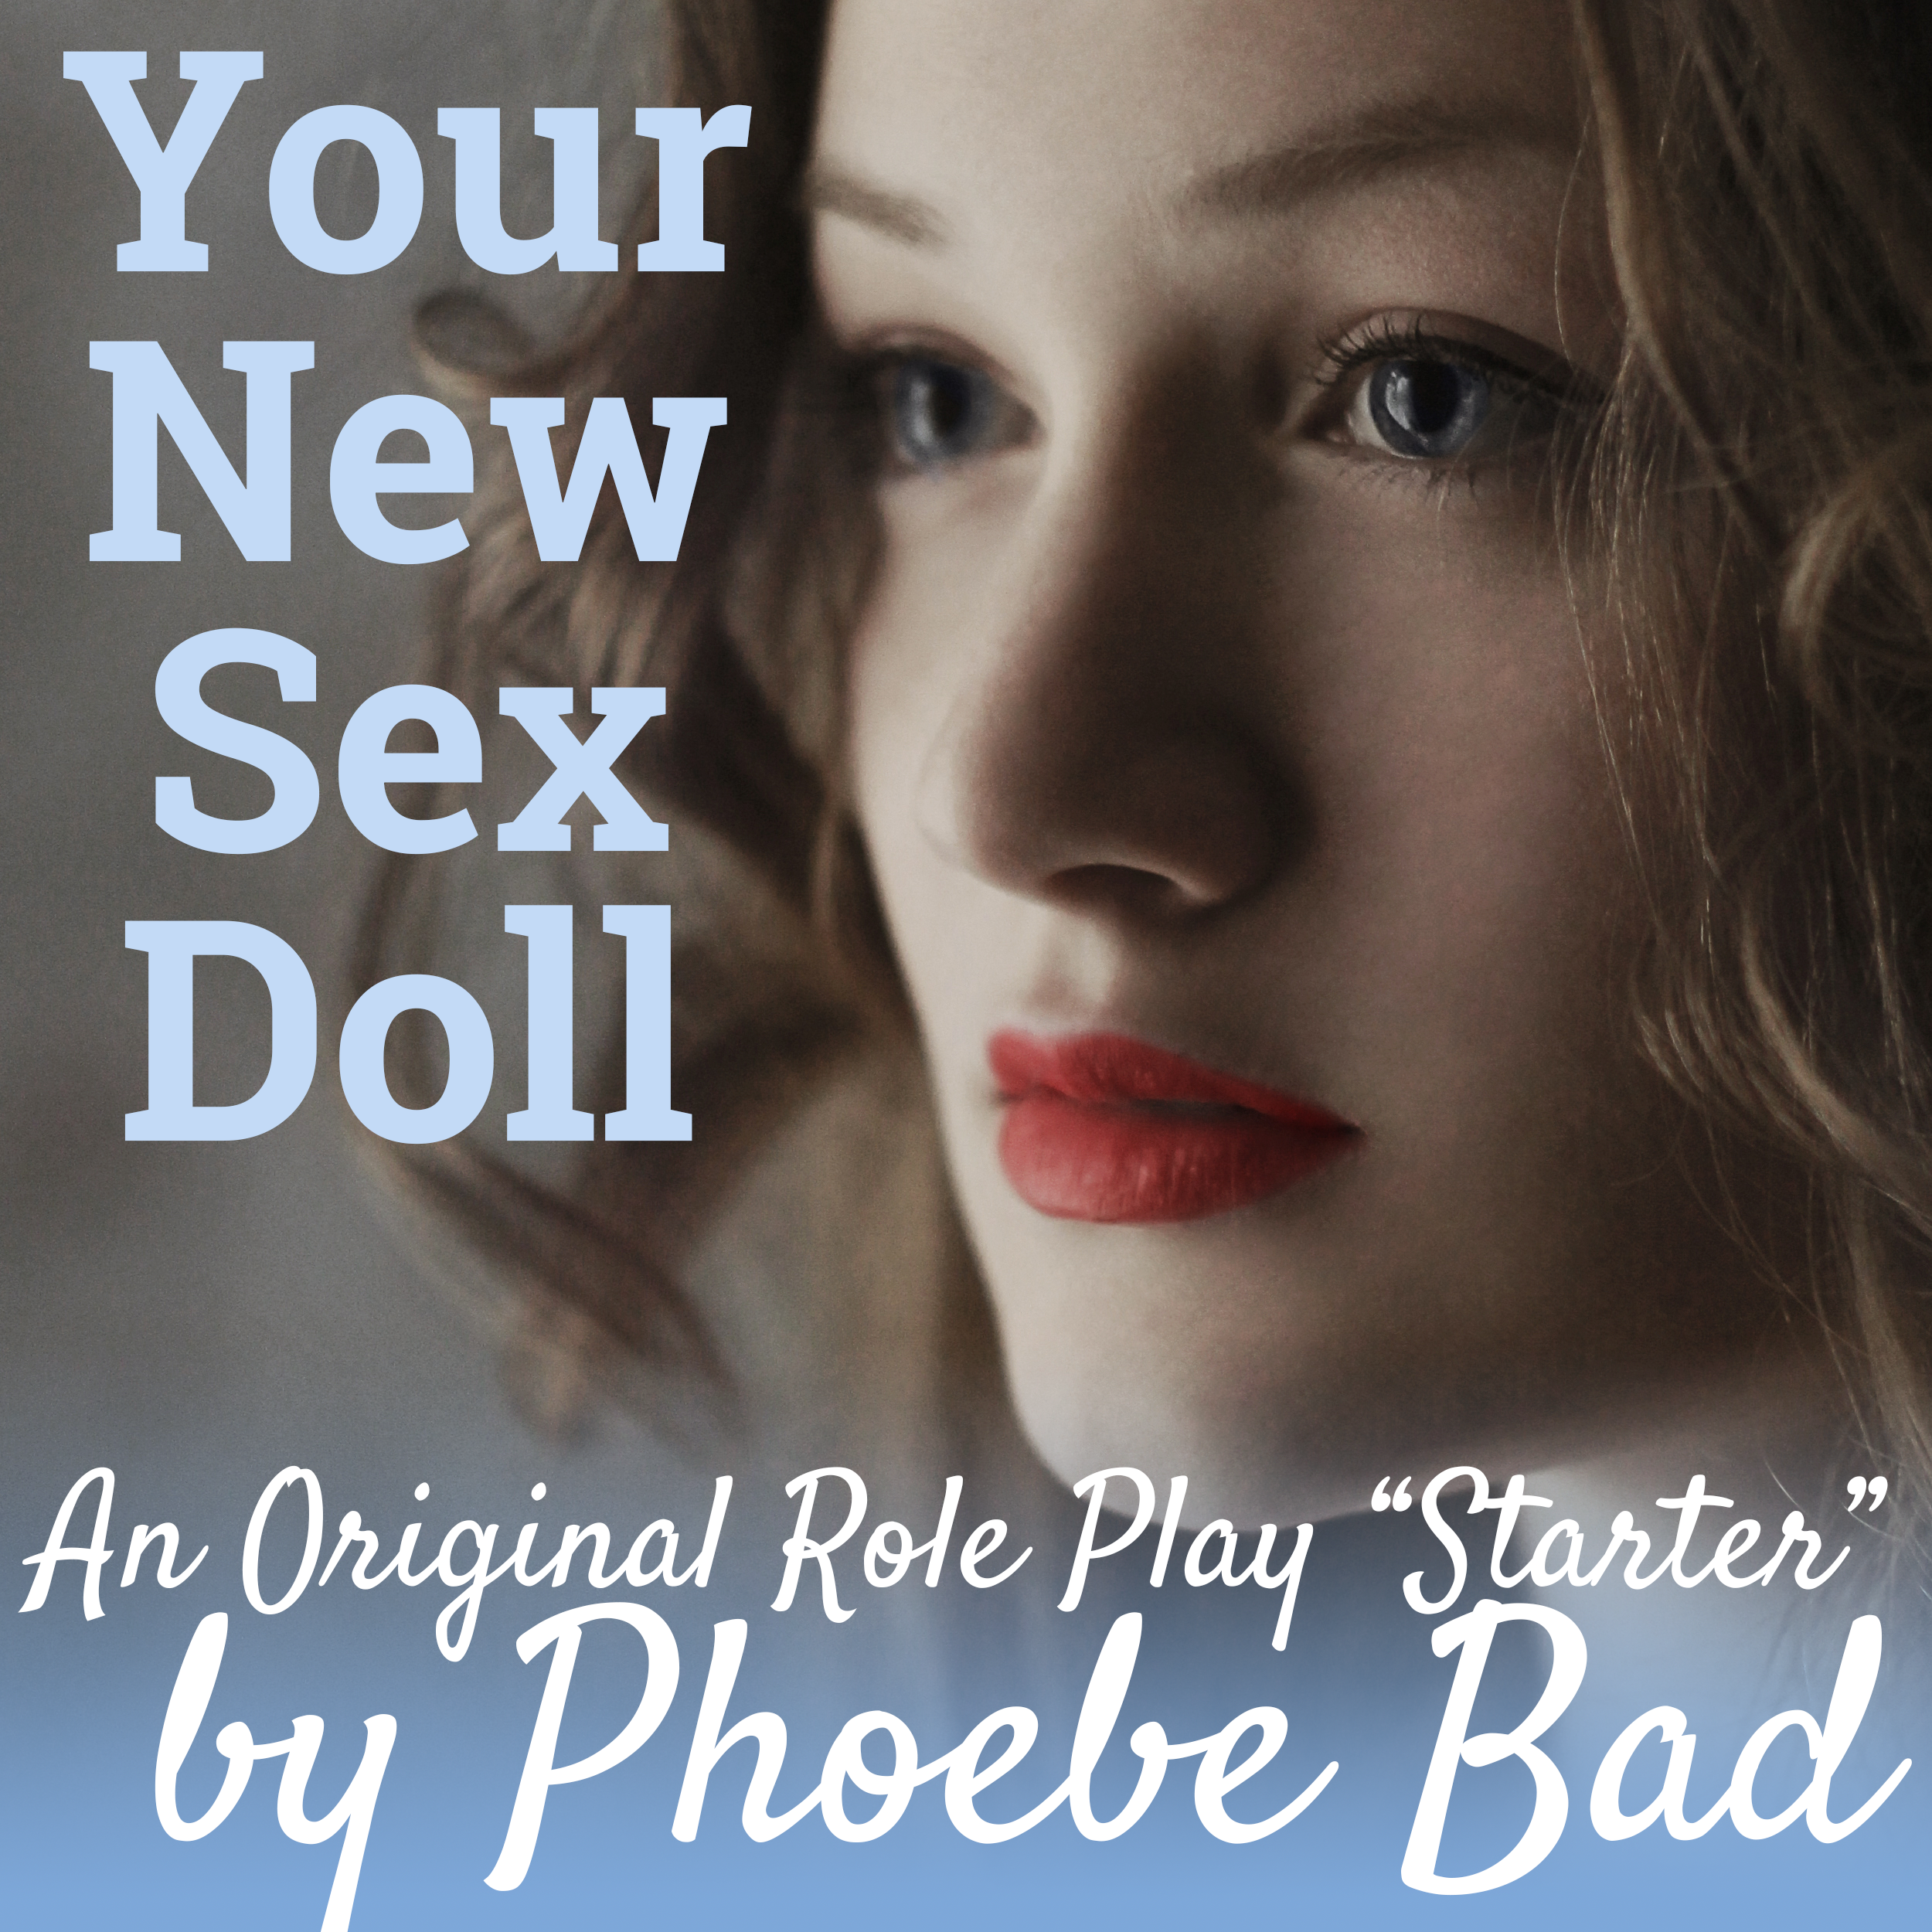 Role Play Starter: Your New Sex Doll